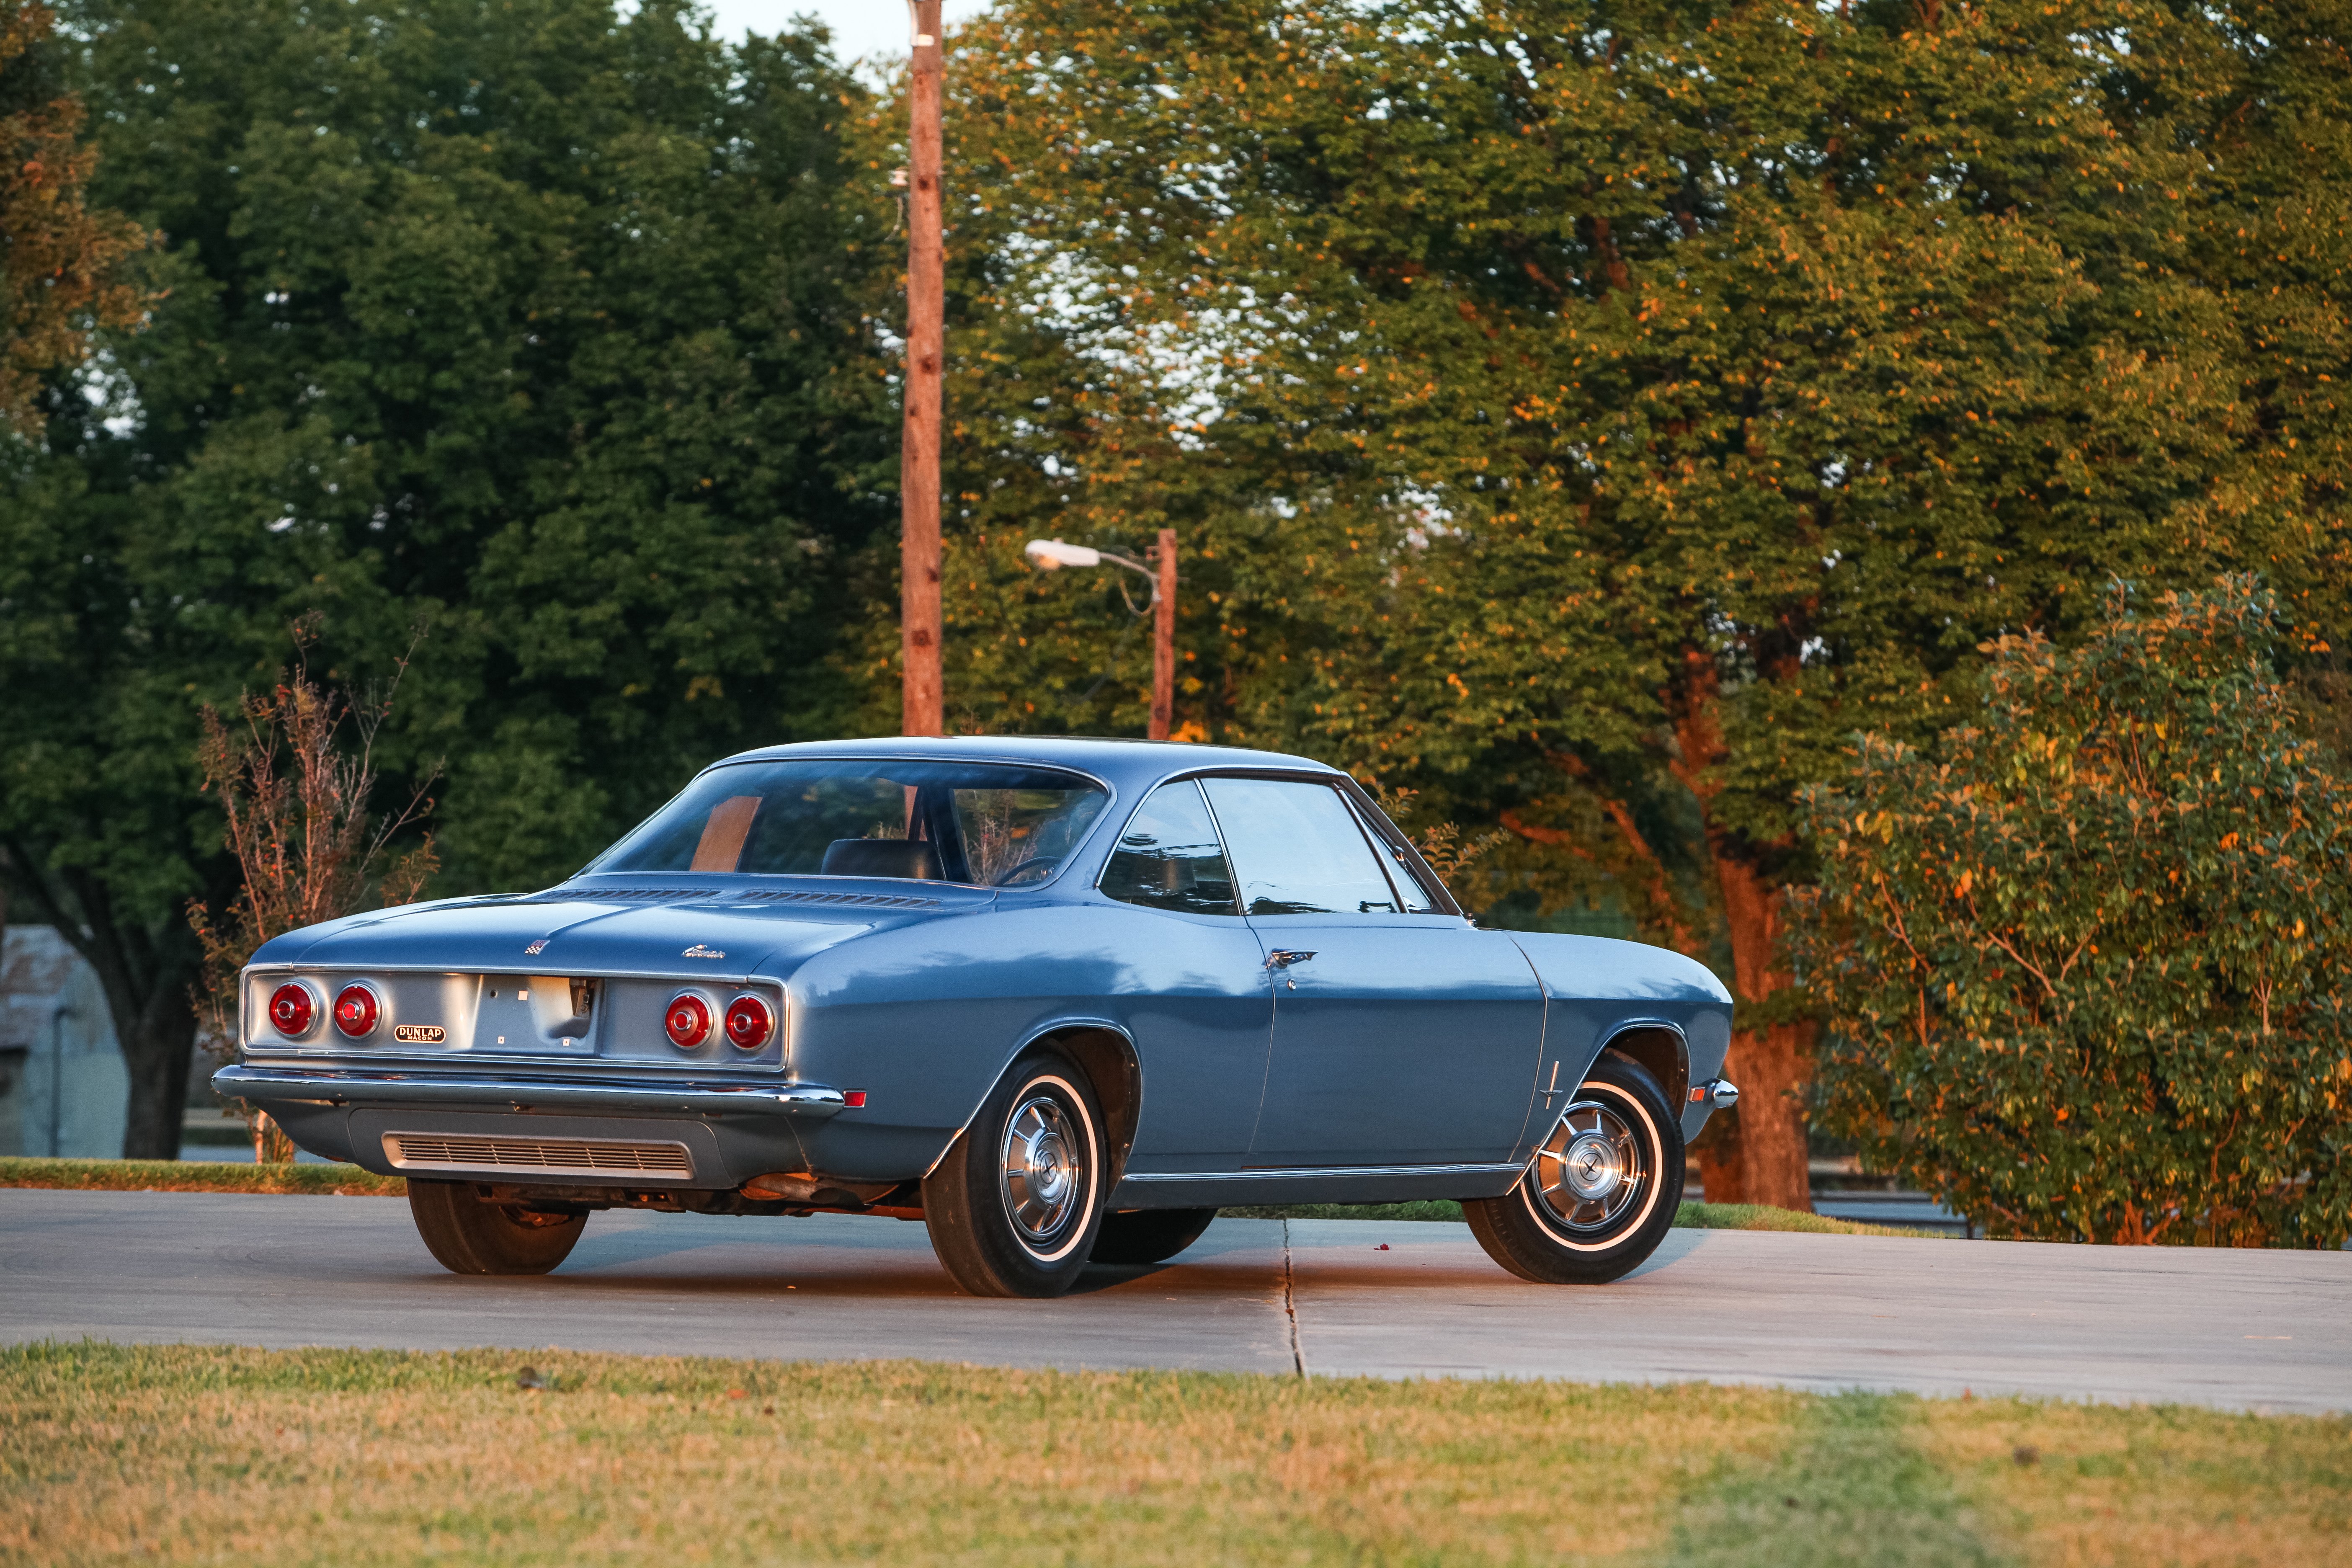 1969, Chevrolet, Corvair, Monza, Coupe, Compact, Classic, Usa, D, 5616x3744 04 Wallpaper